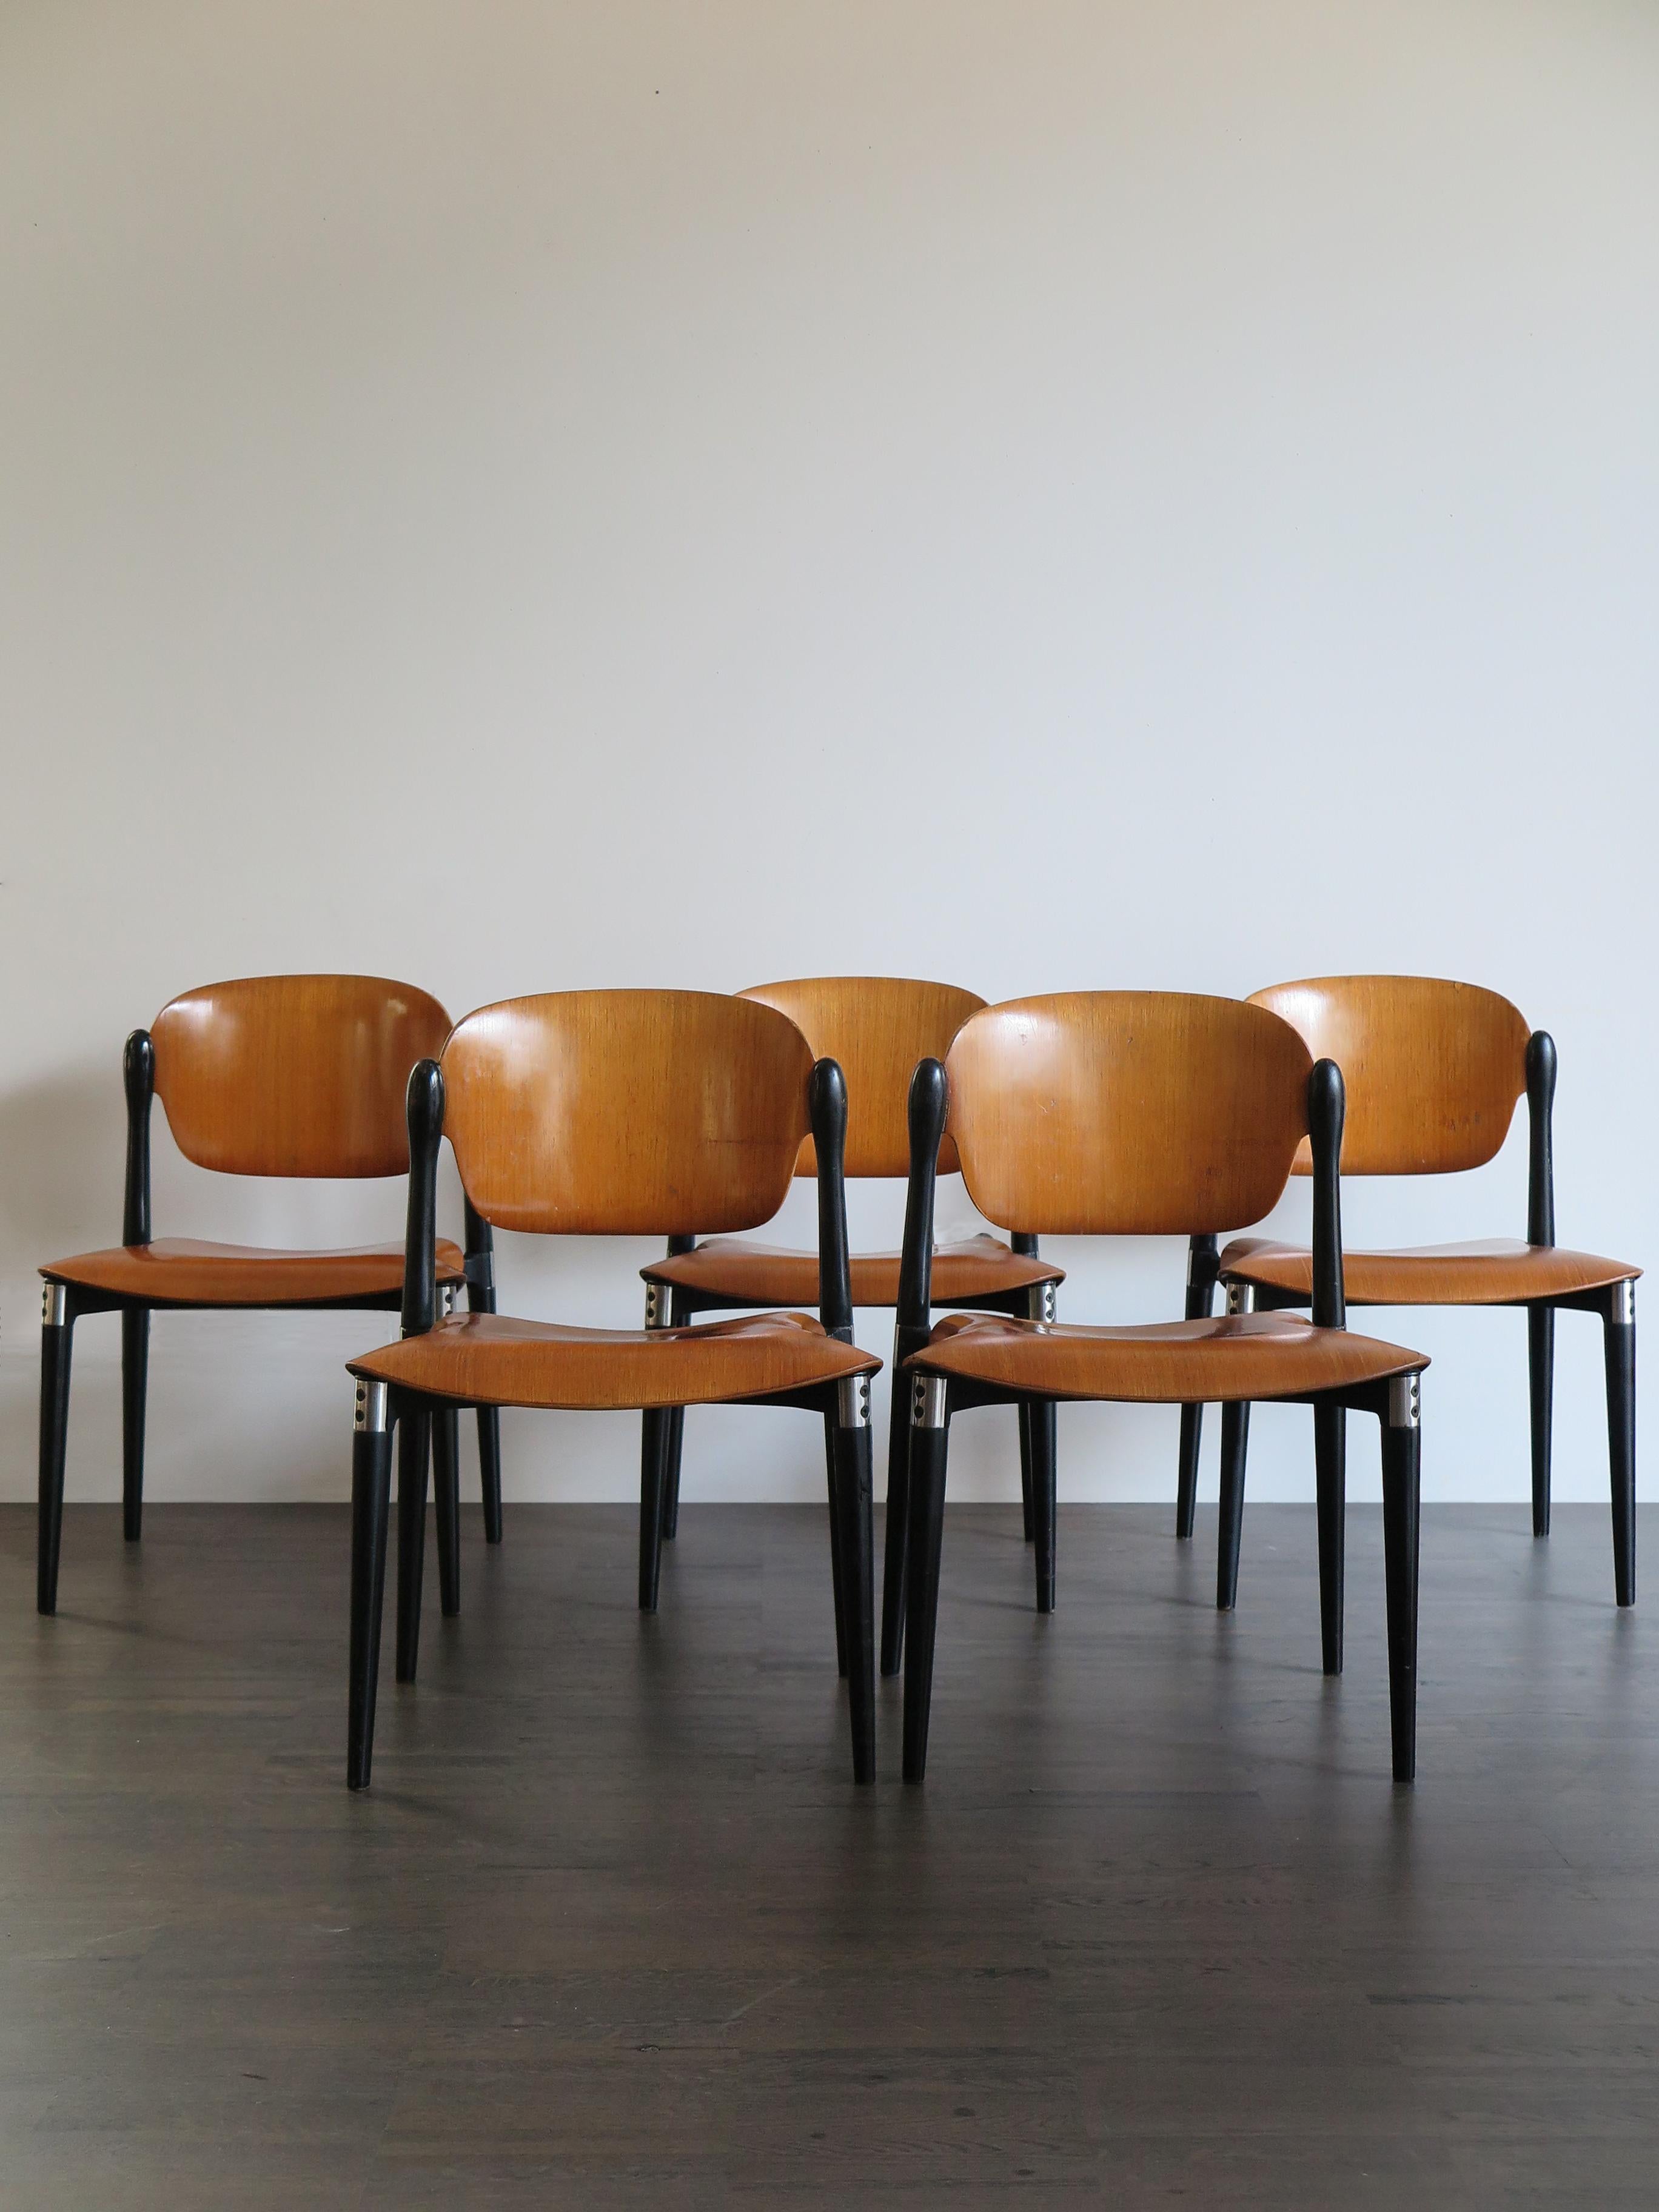 Set of five Italian dining chairs model “S832” designed by Eugenio Gerli (Milano 1923 - Milano 2013) and produced by Tecno Varedo from 1962, black painted metal frames, removable legs in black lacquered turned wood, seats and backs in curved wood,